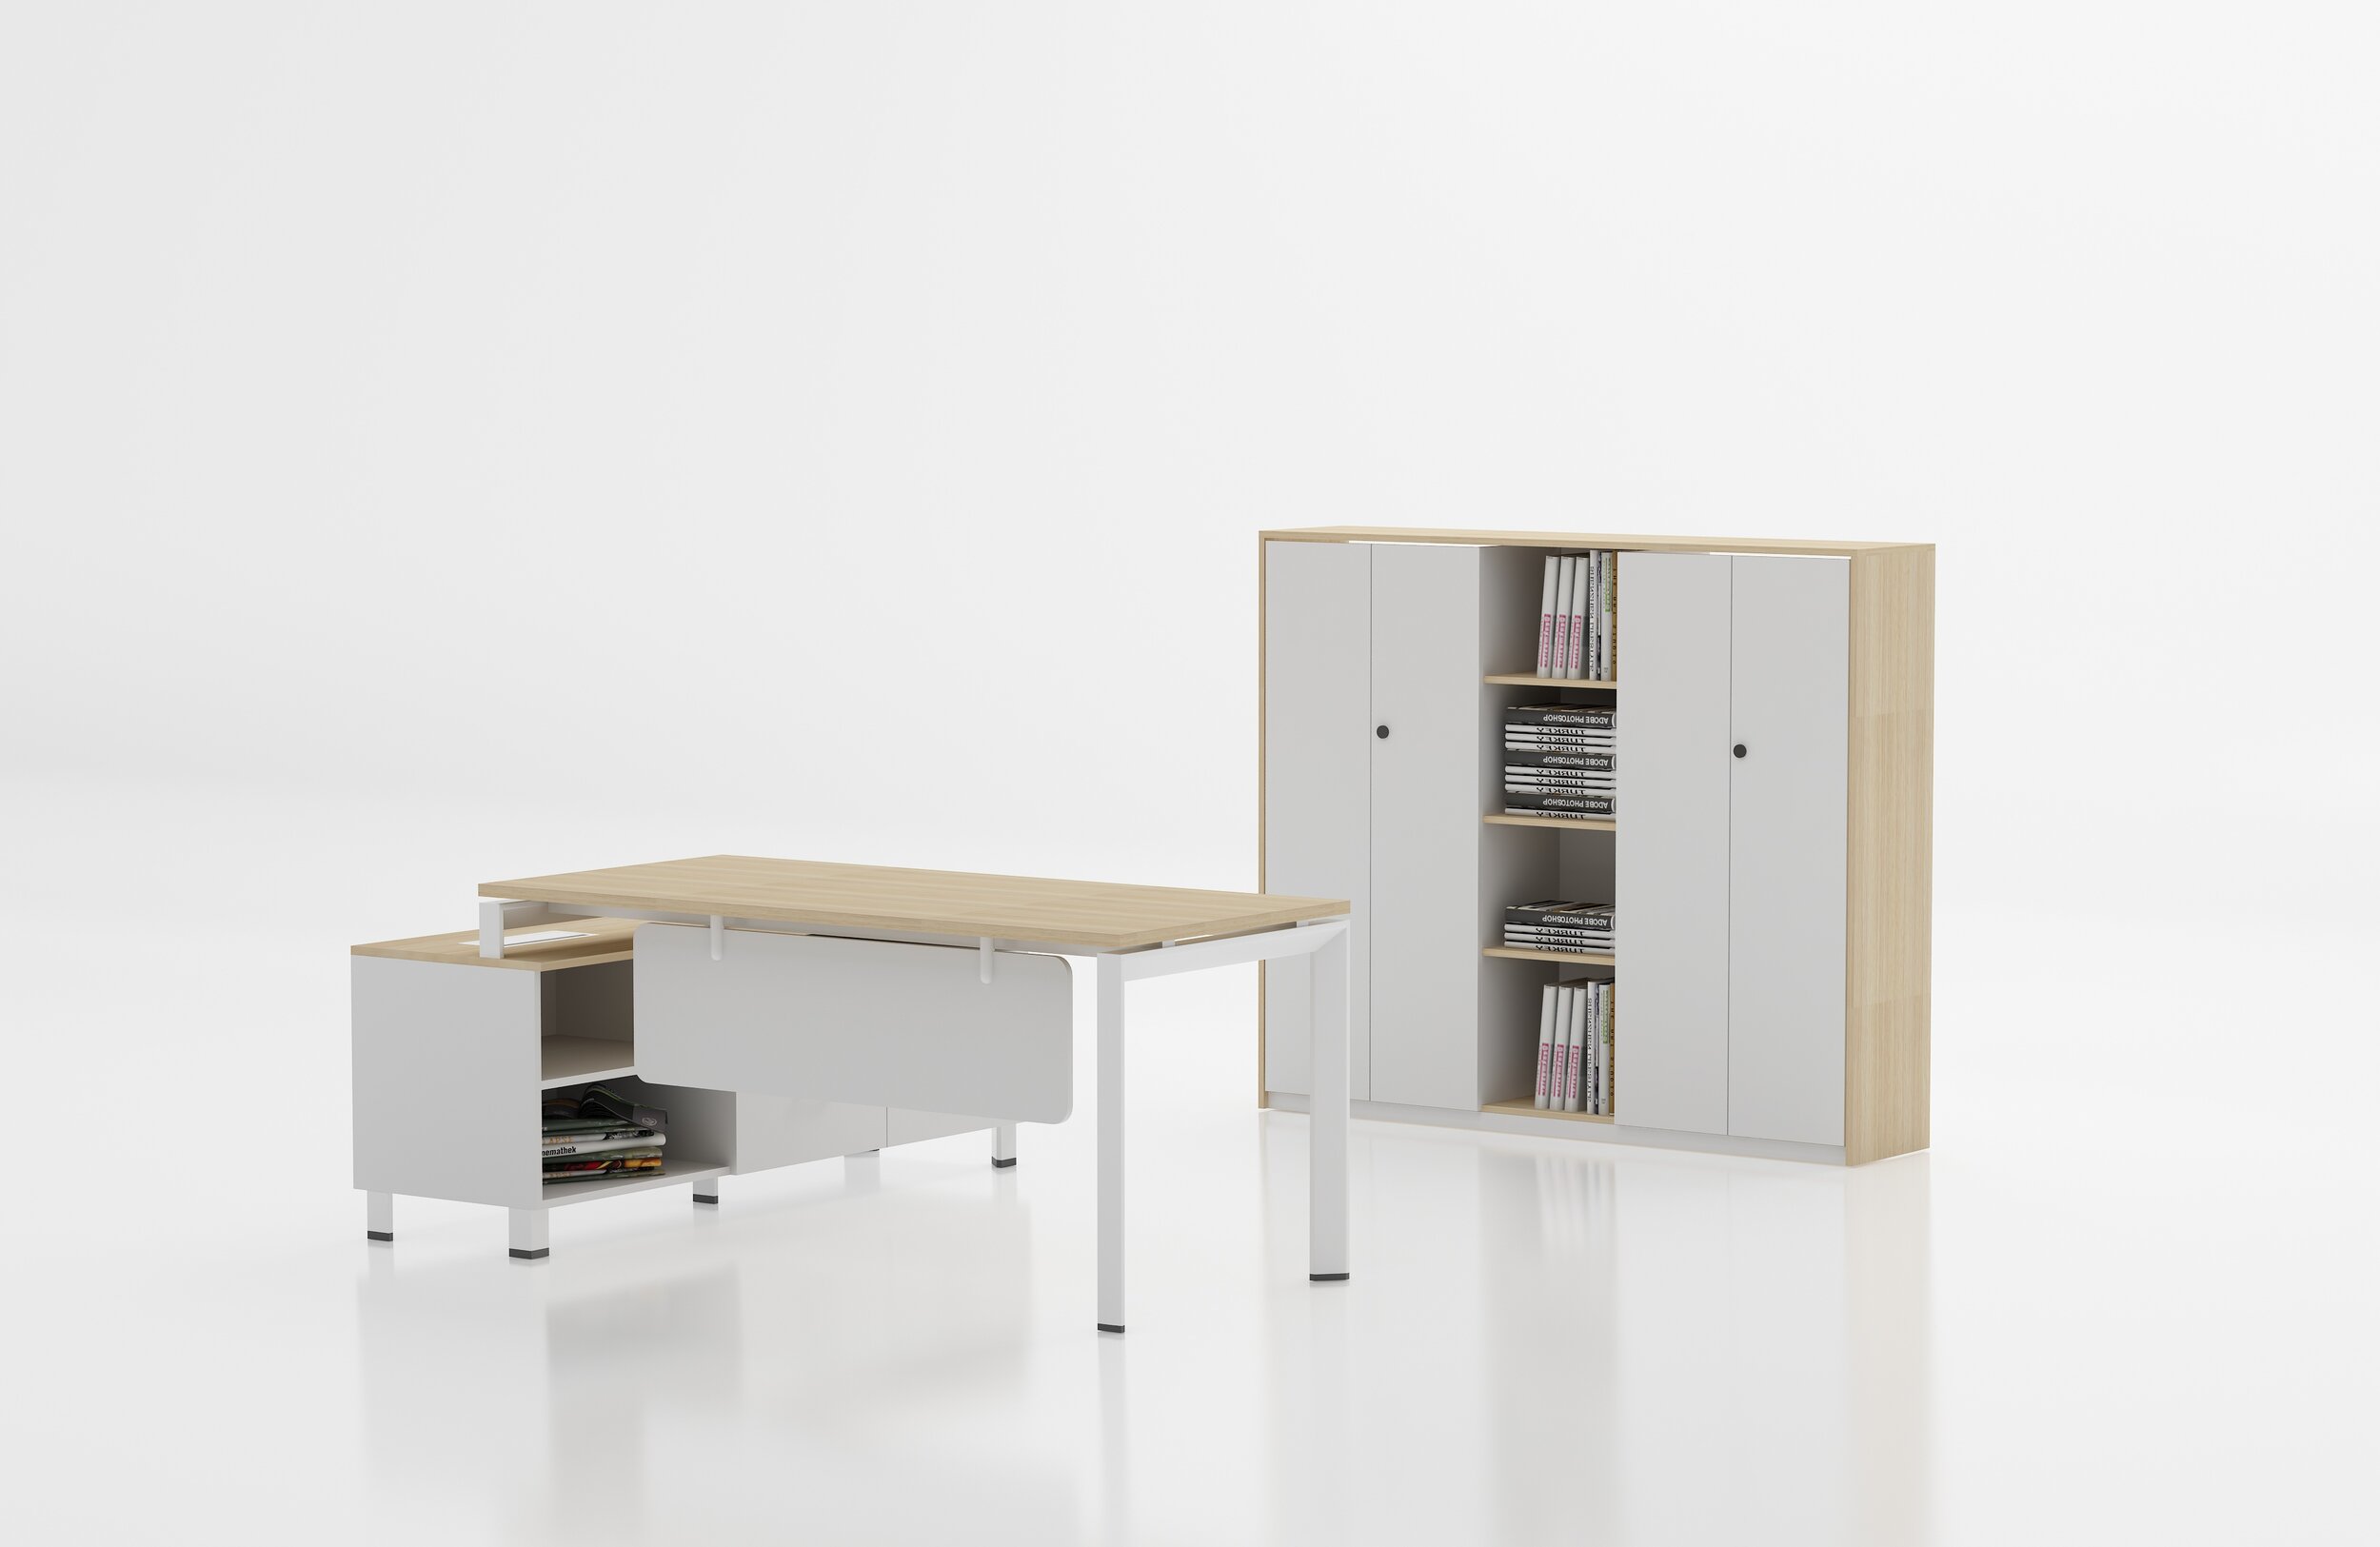 Matching Natural Birch and White desk and bookcase